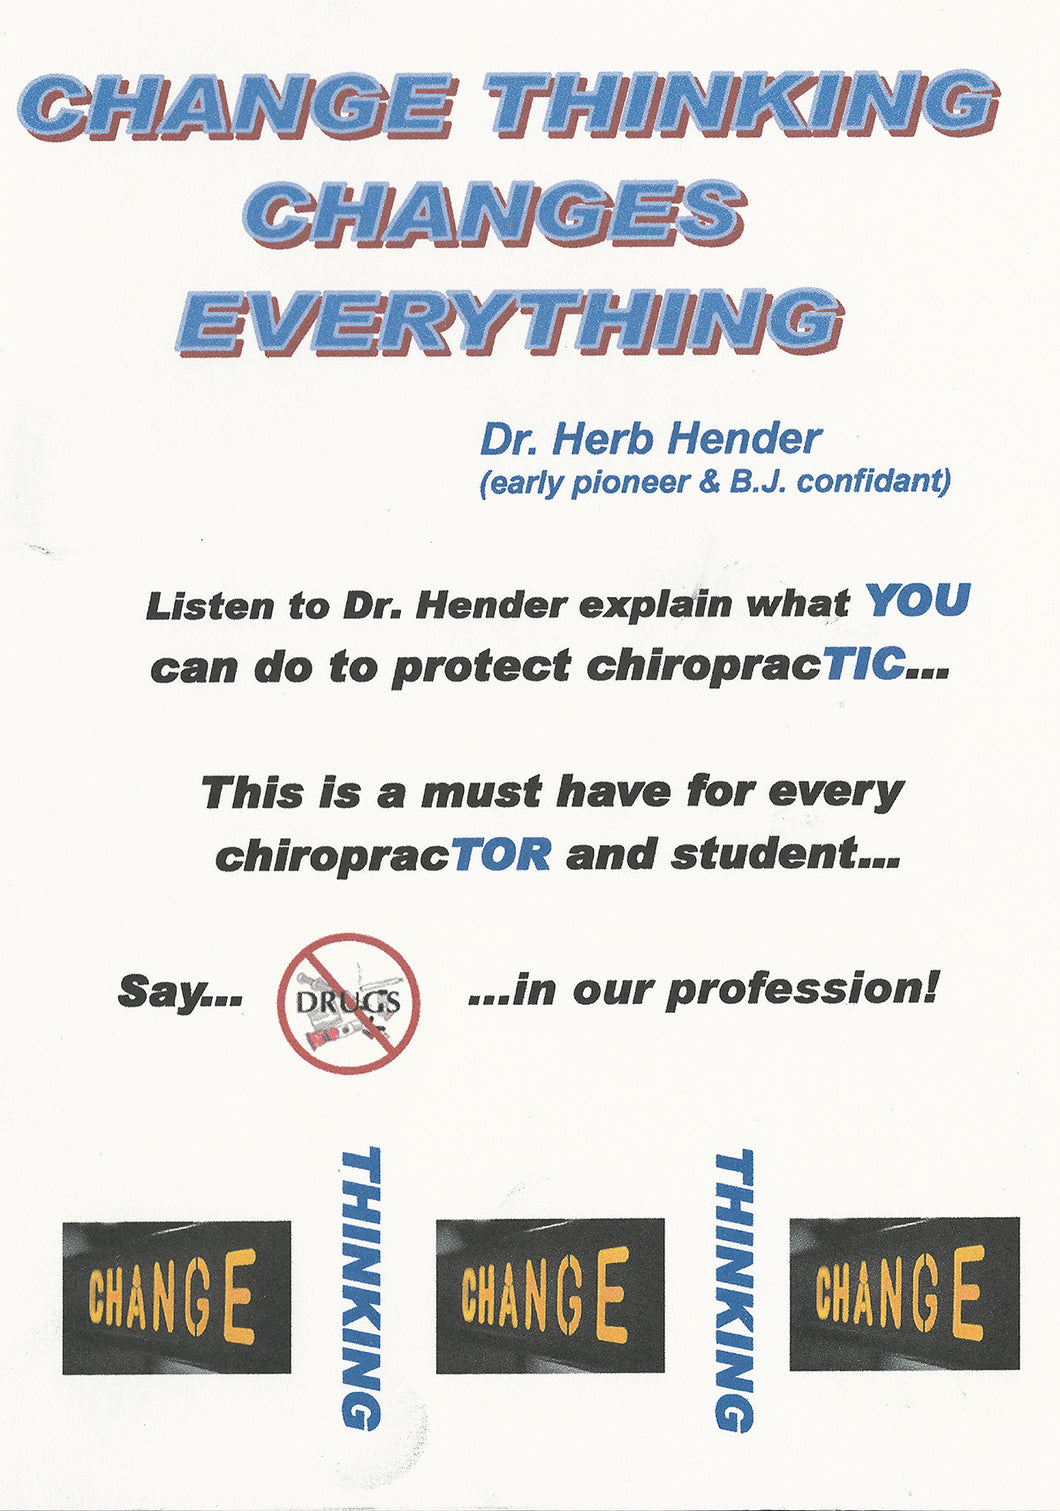 Change Thinking Changes Everything (A must for every DC & Student) MP3